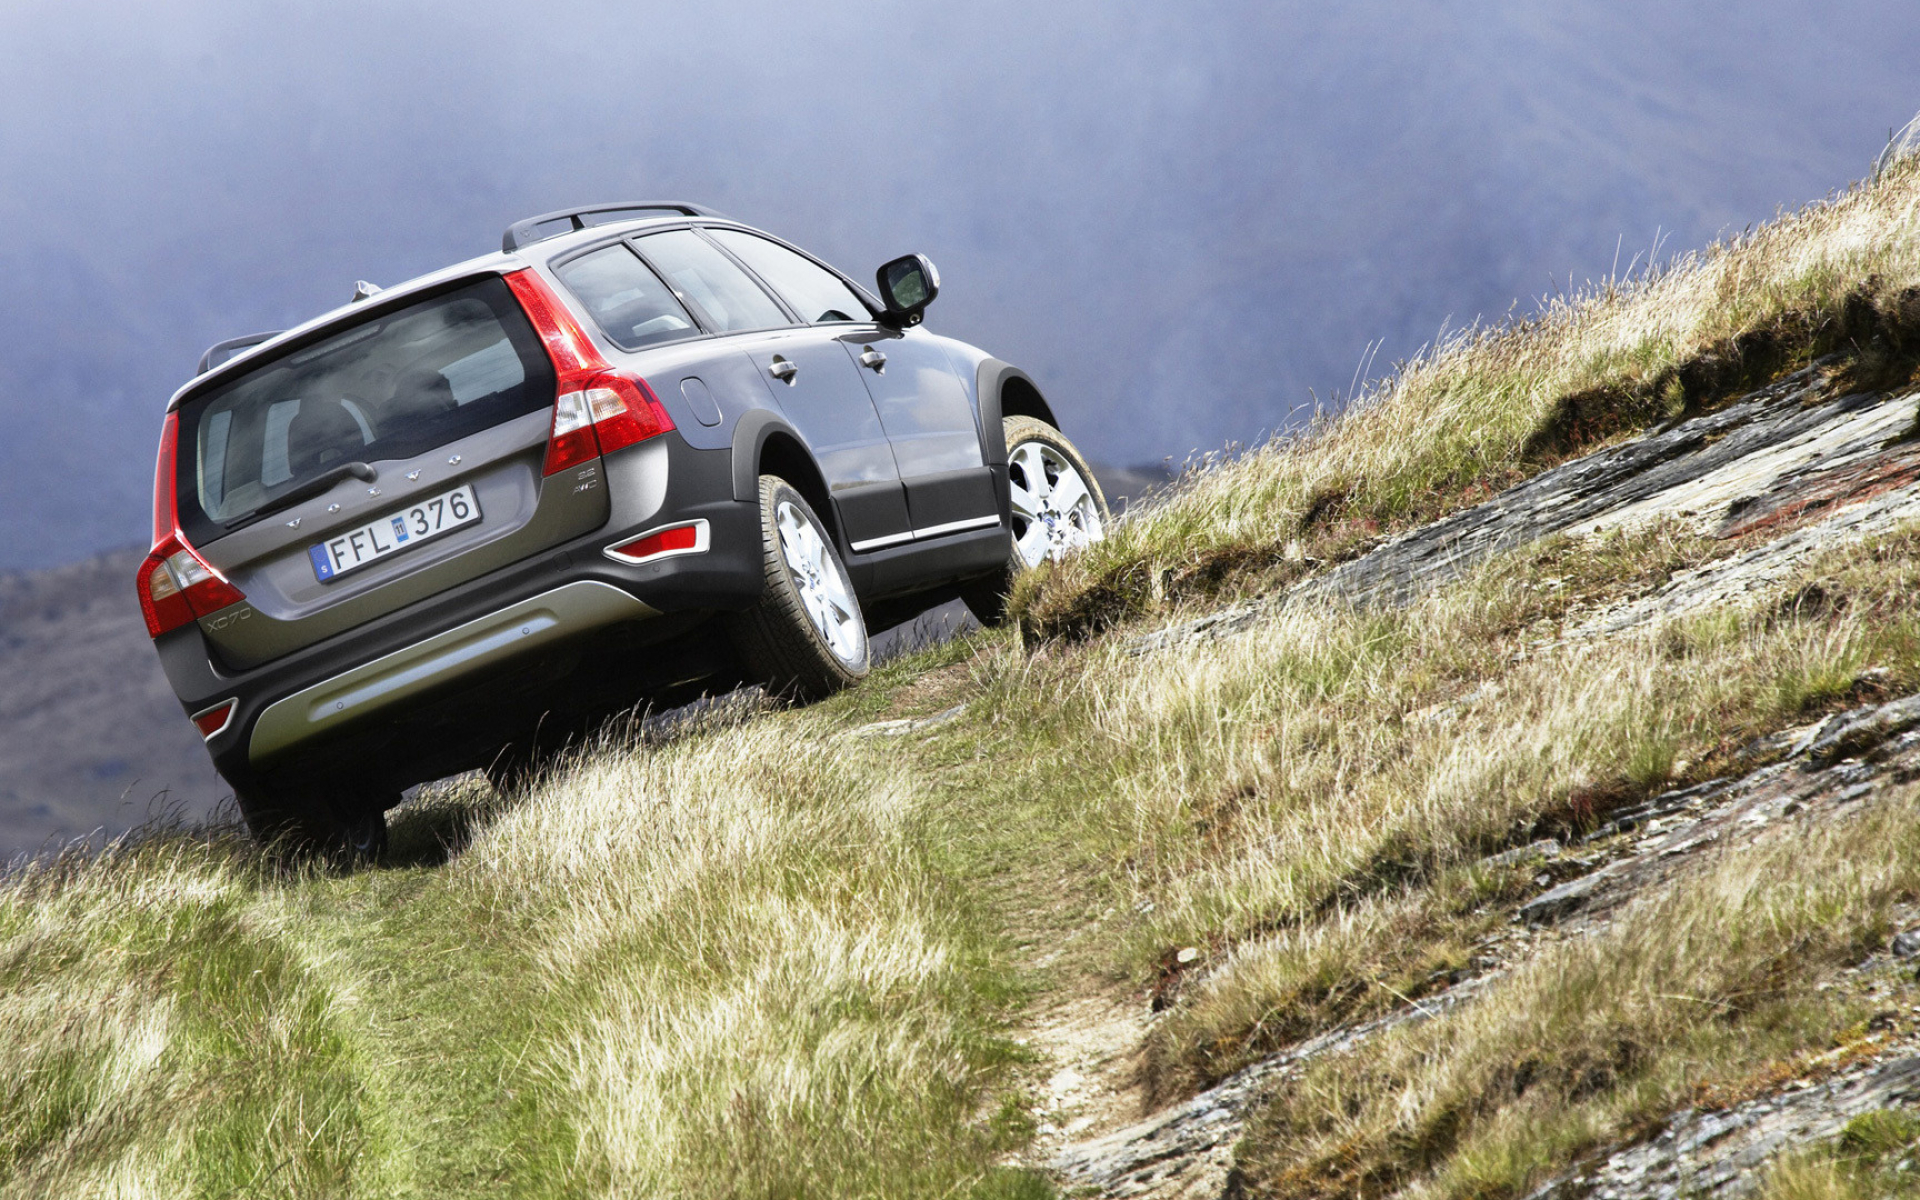 Volvo XC60, Hill path adventure, Off-road capabilities, Unmatched reliability, 1920x1200 HD Desktop